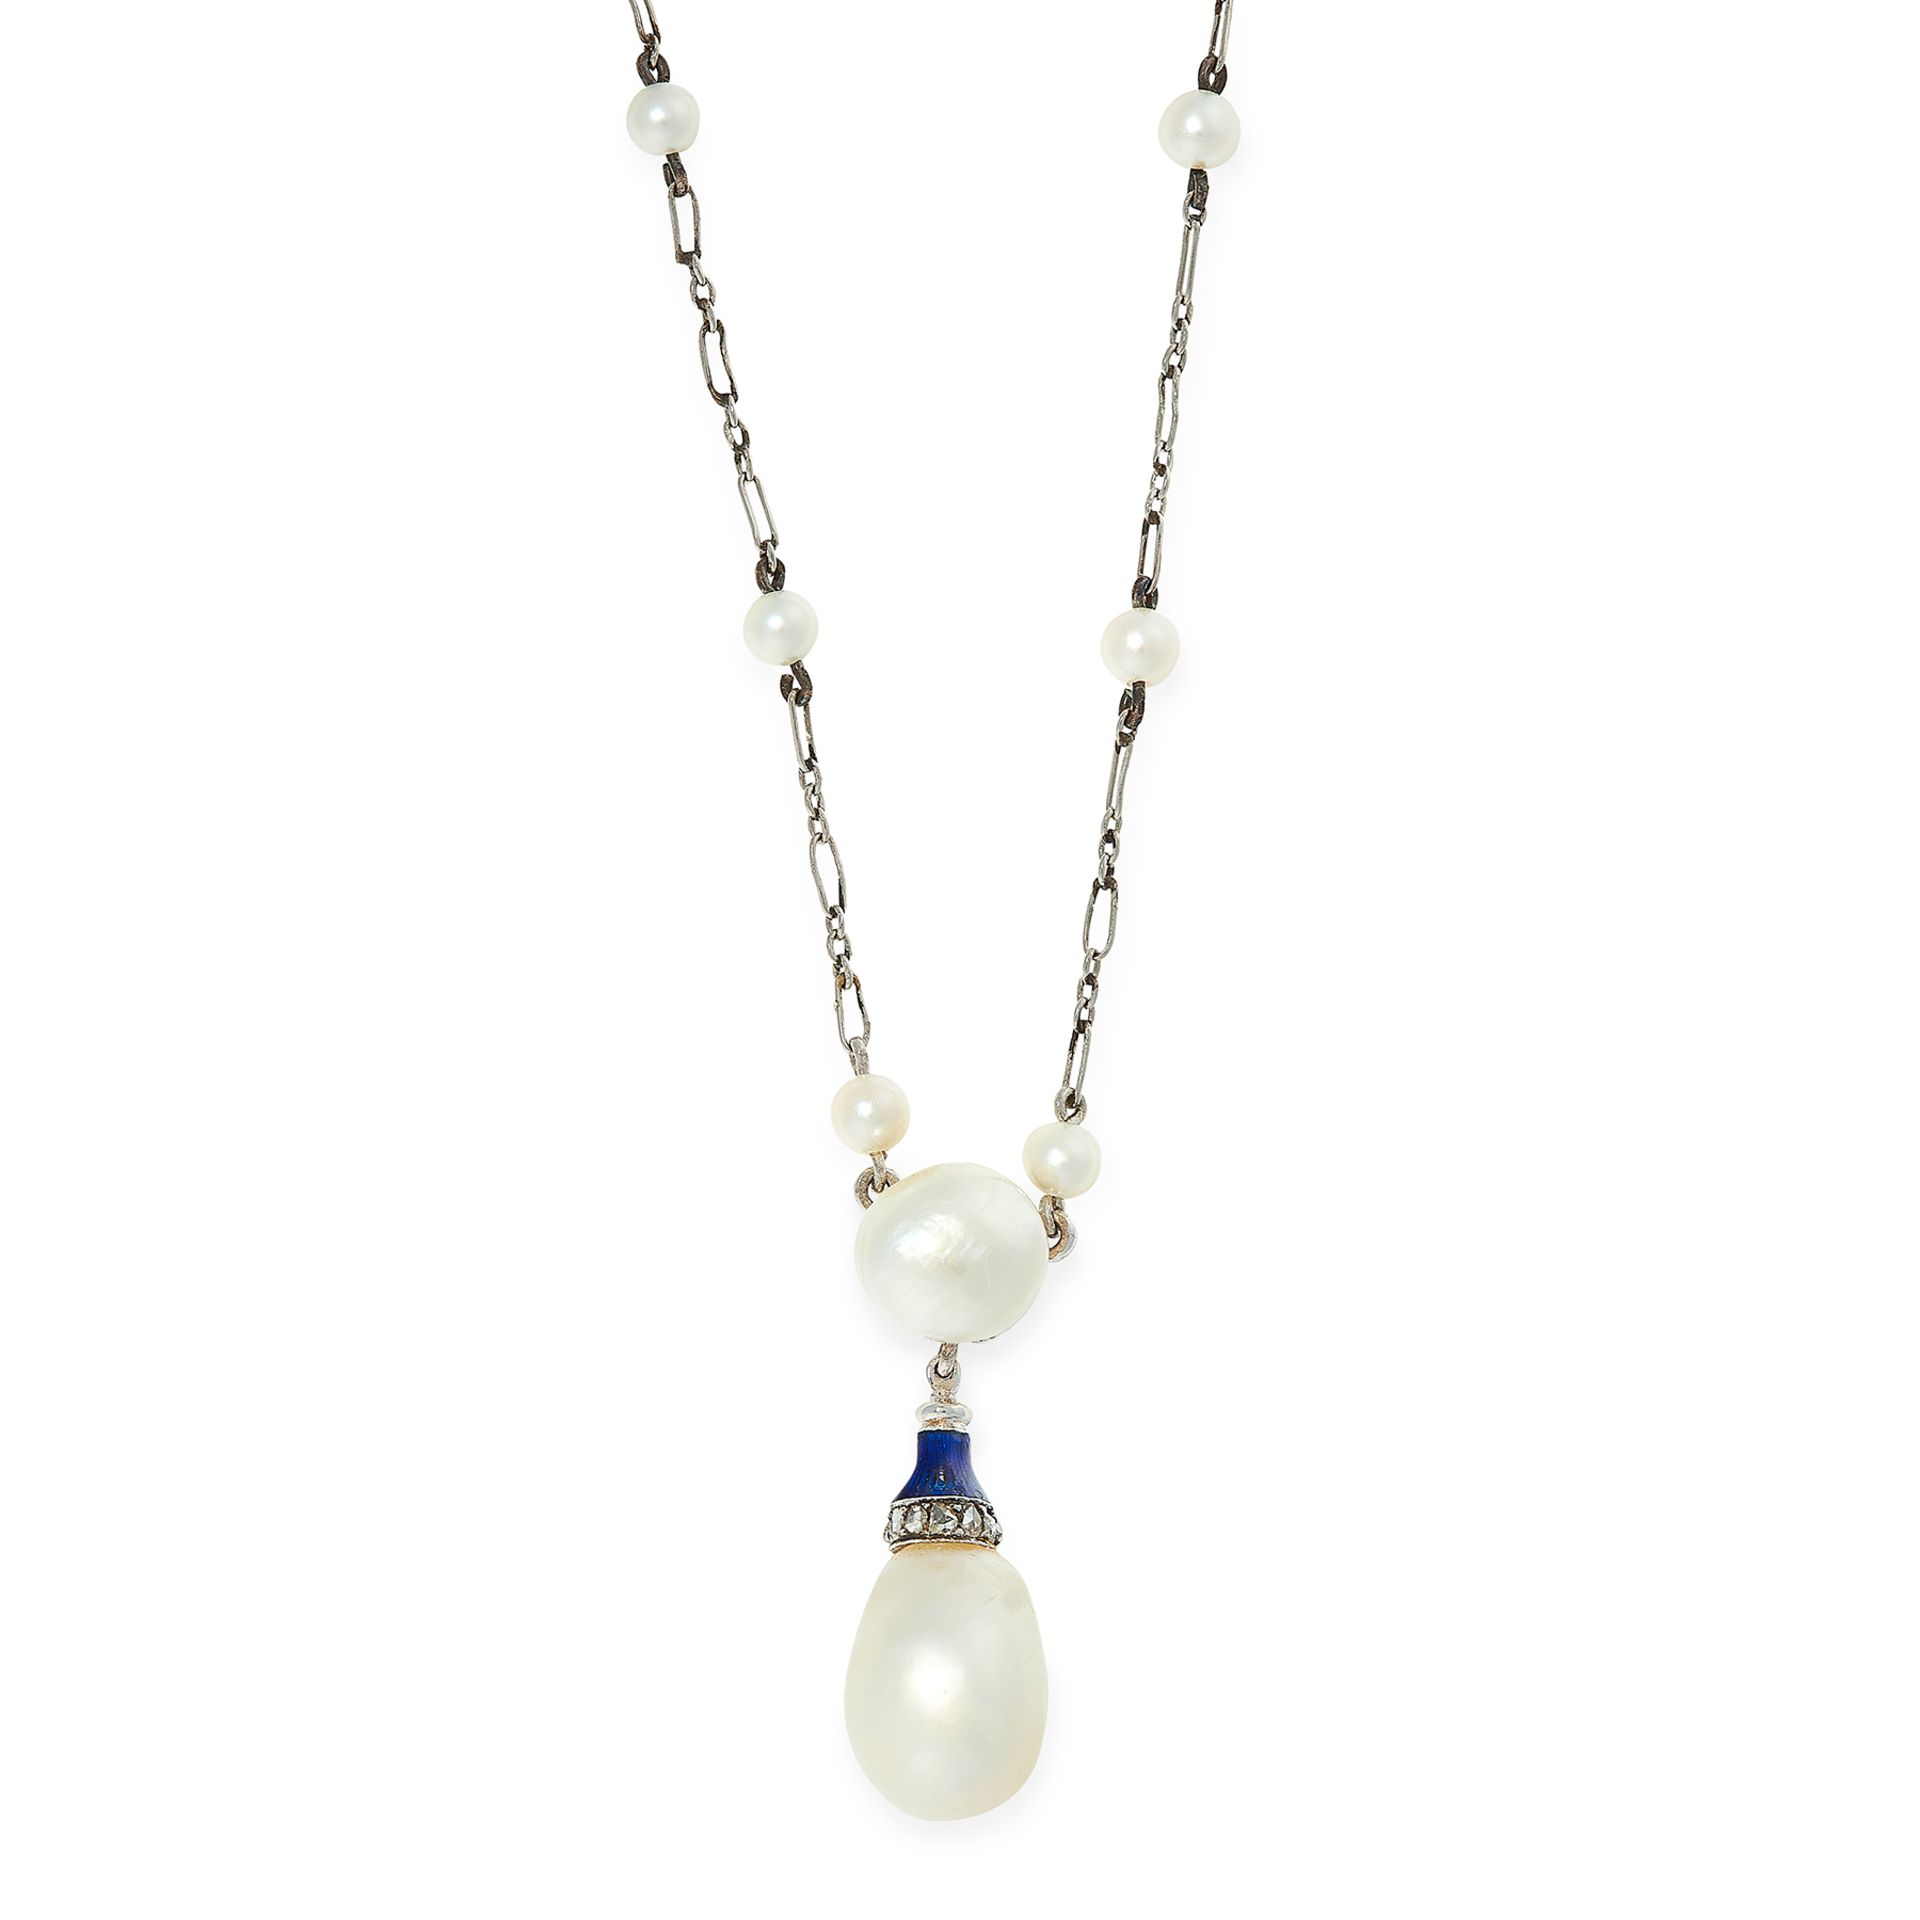 A NATURAL PEARL, DIAMOND AND ENAMEL PENDANT NECKLACE, EARLY 20TH CENTURY set with a drop shaped